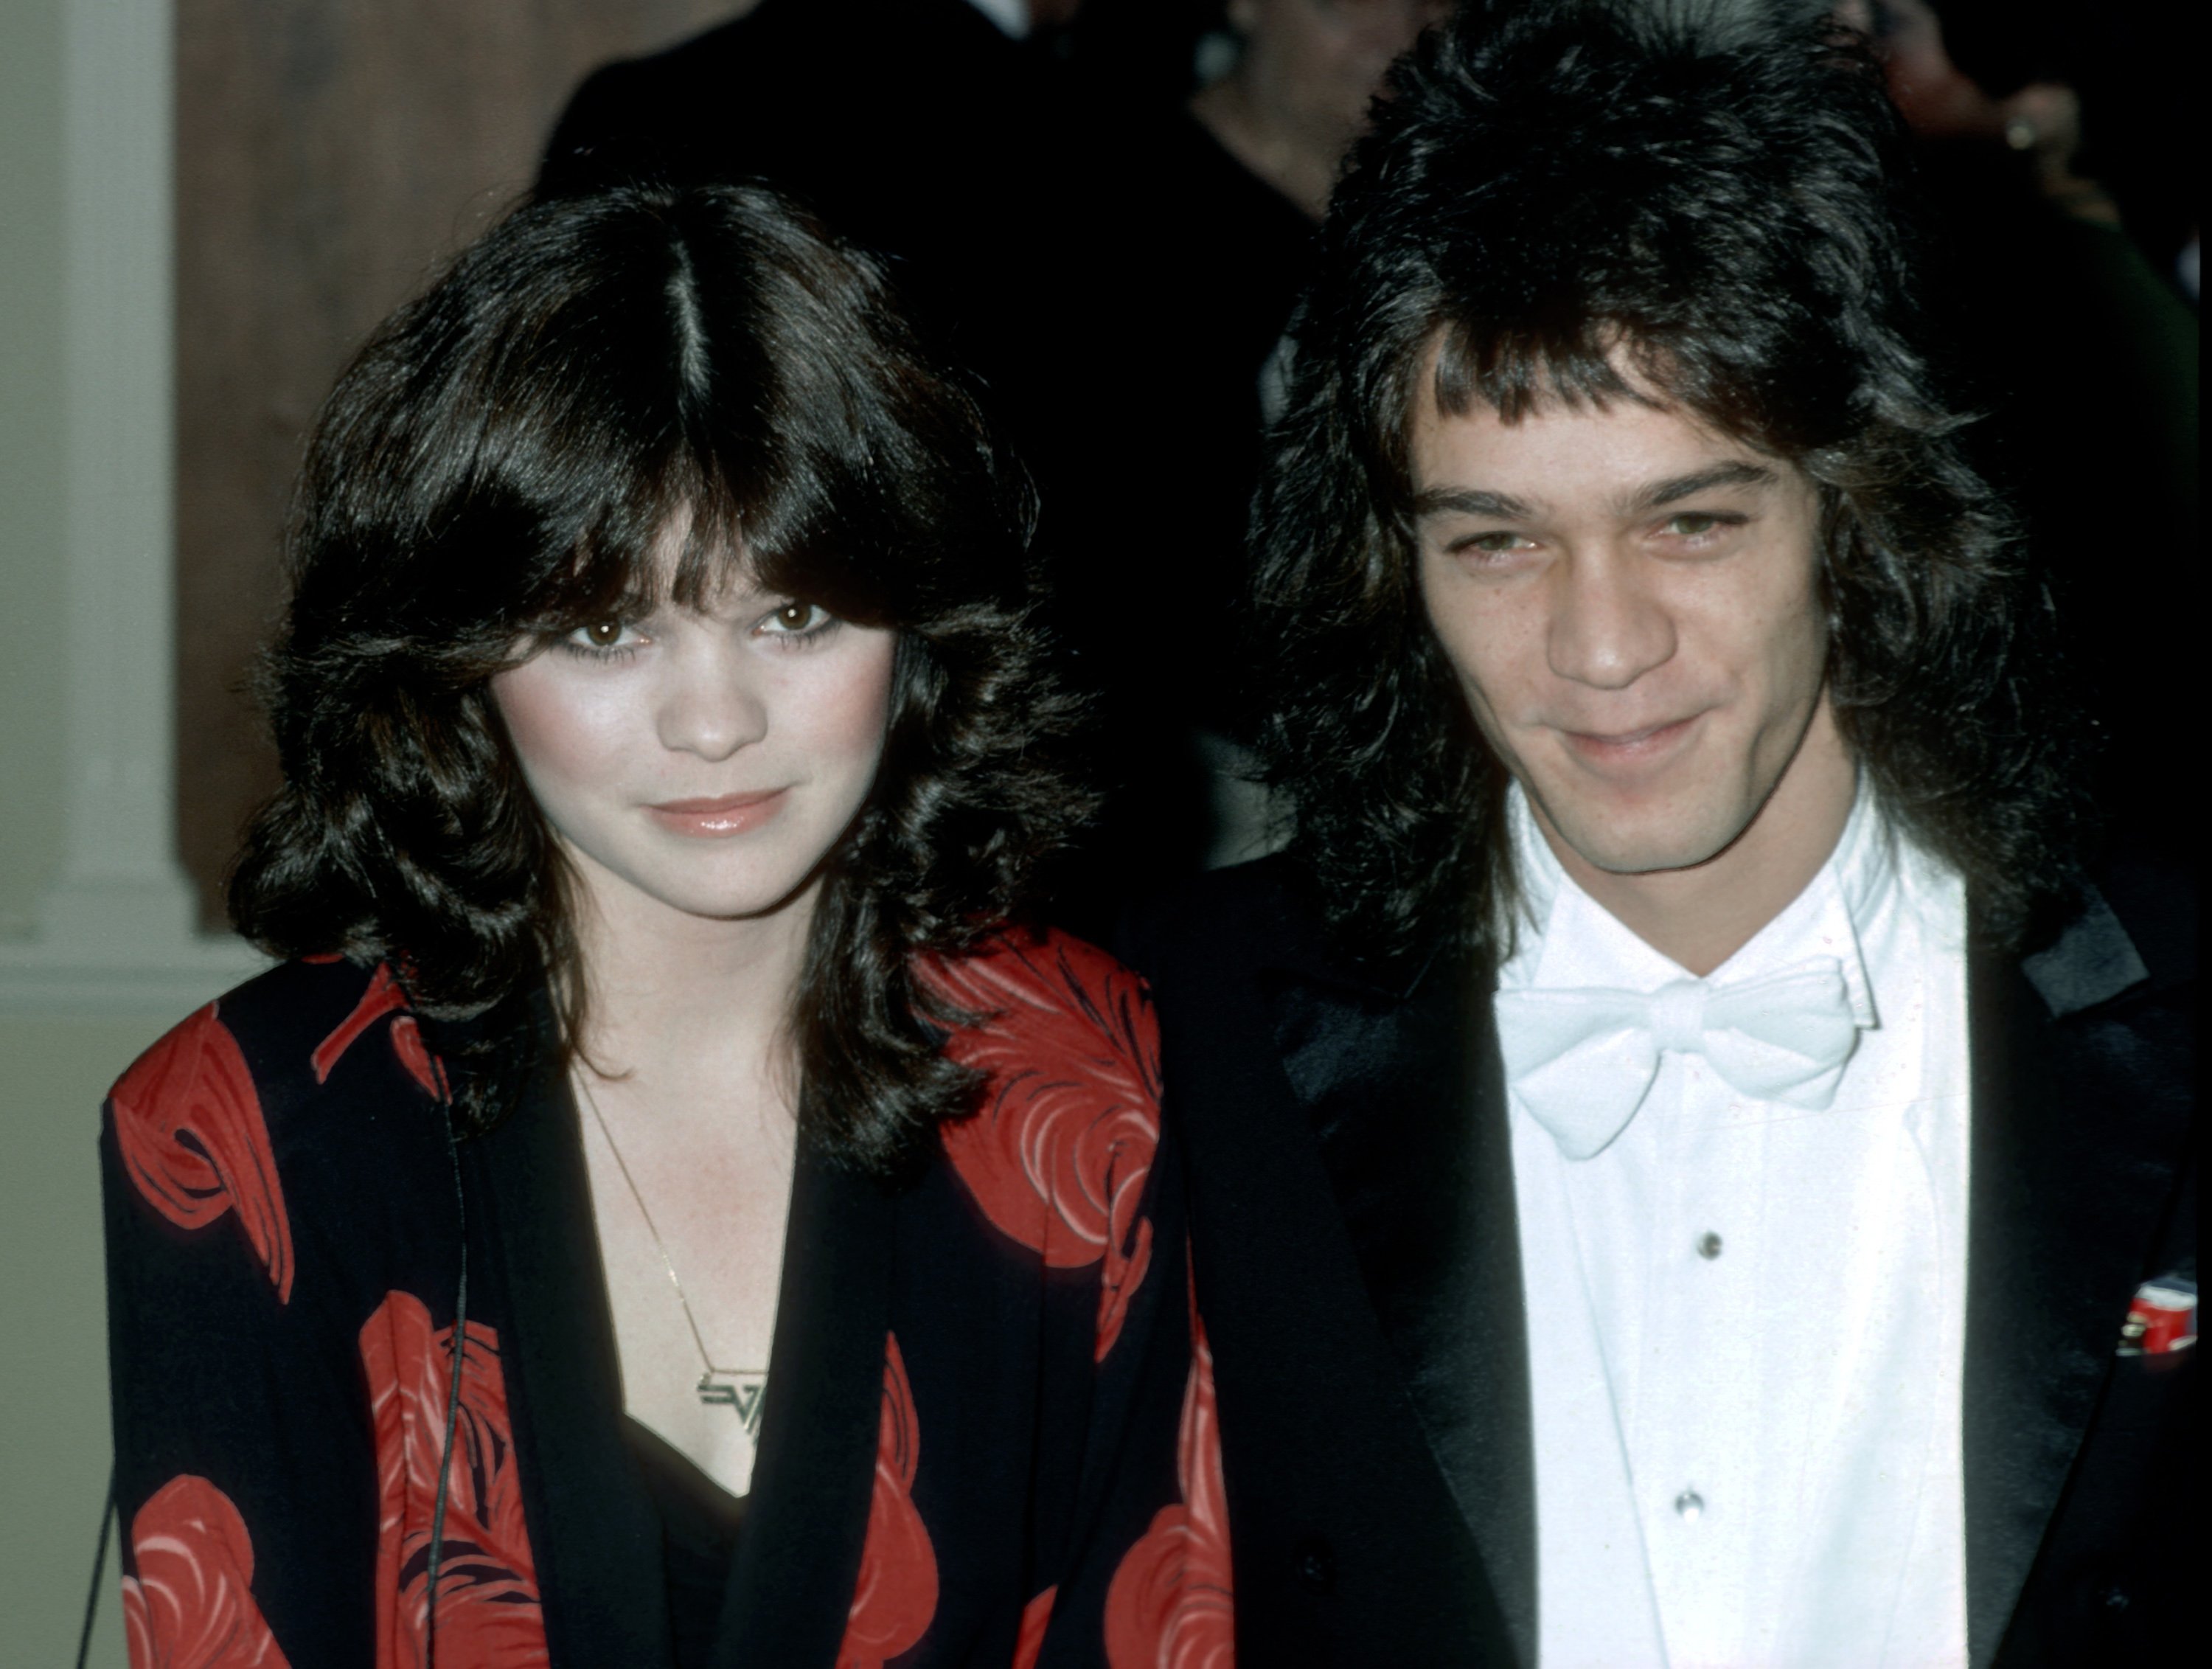 Valerie Bertinelli and Eddie Van Halen during the 38th Annual Golden Globe Awards in Beverly Hills, California, on January 31, 1981 | Source: Getty Images